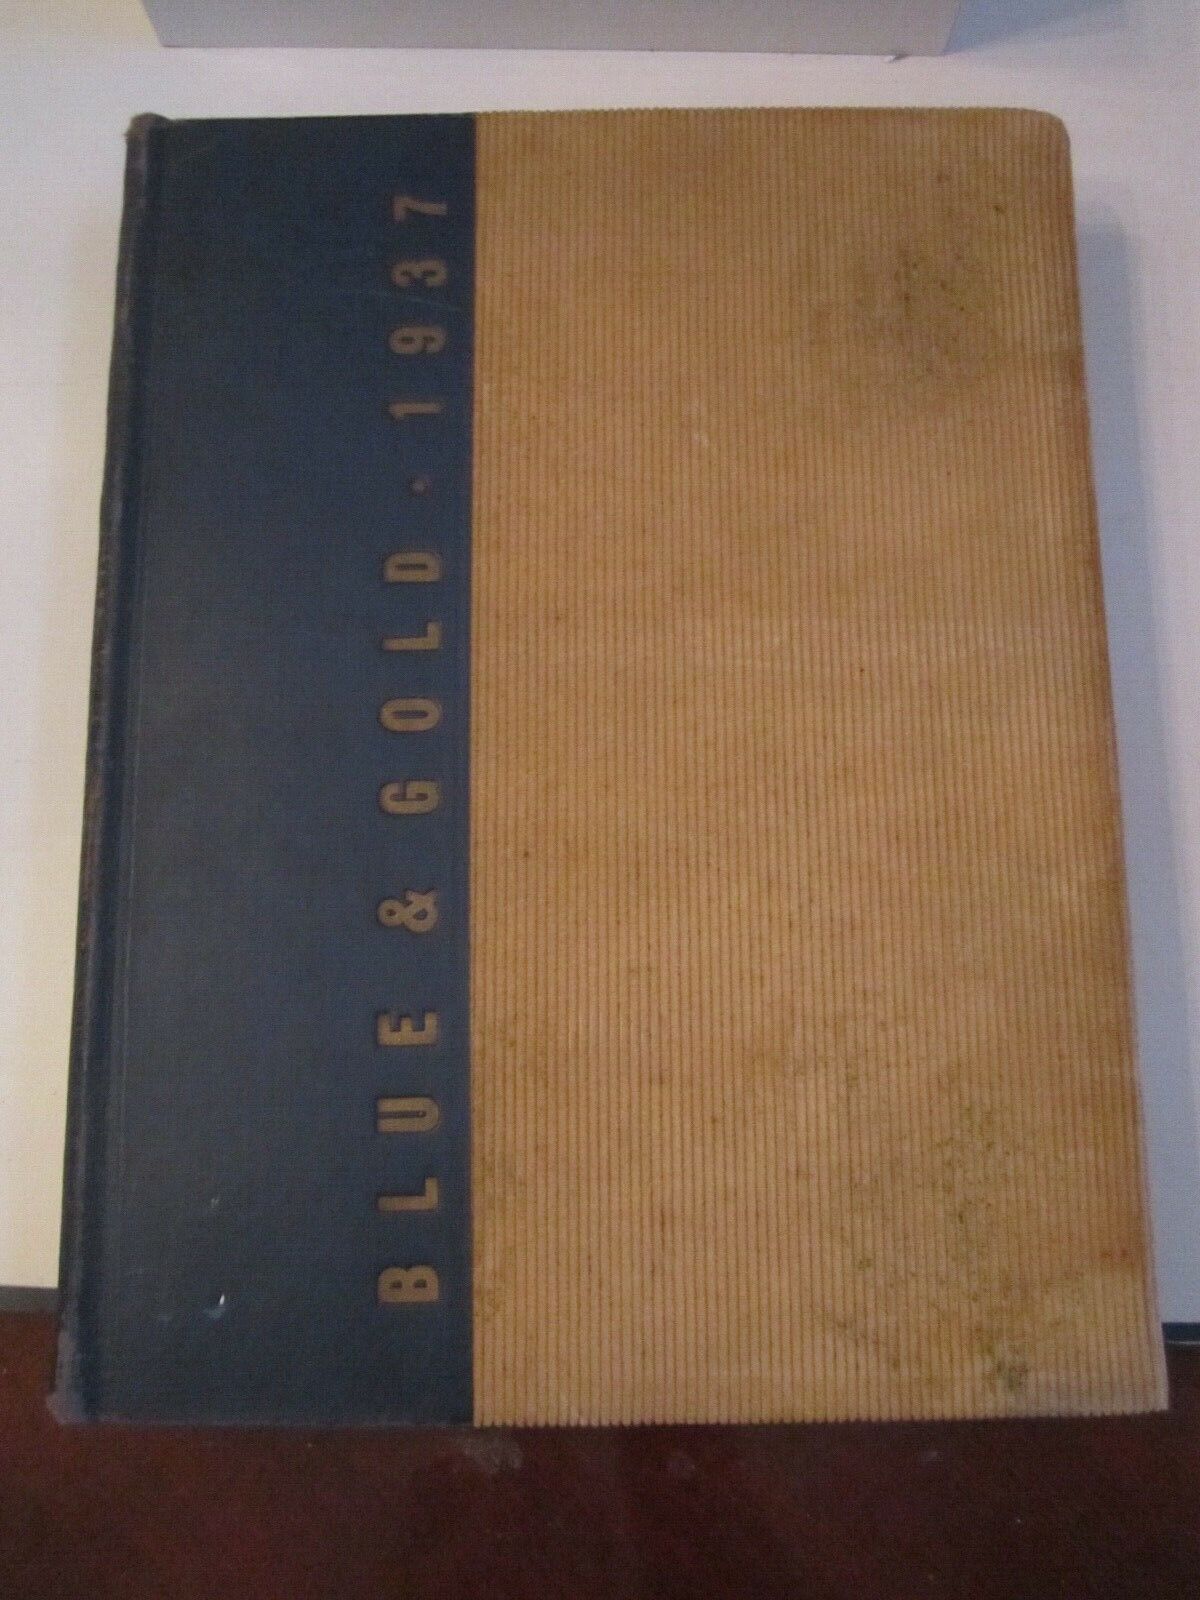 1937 THE UNIVERSITY OF CALIFORNIA YEAR BOOK - BLUE AND GOLD - VERY HEAVY